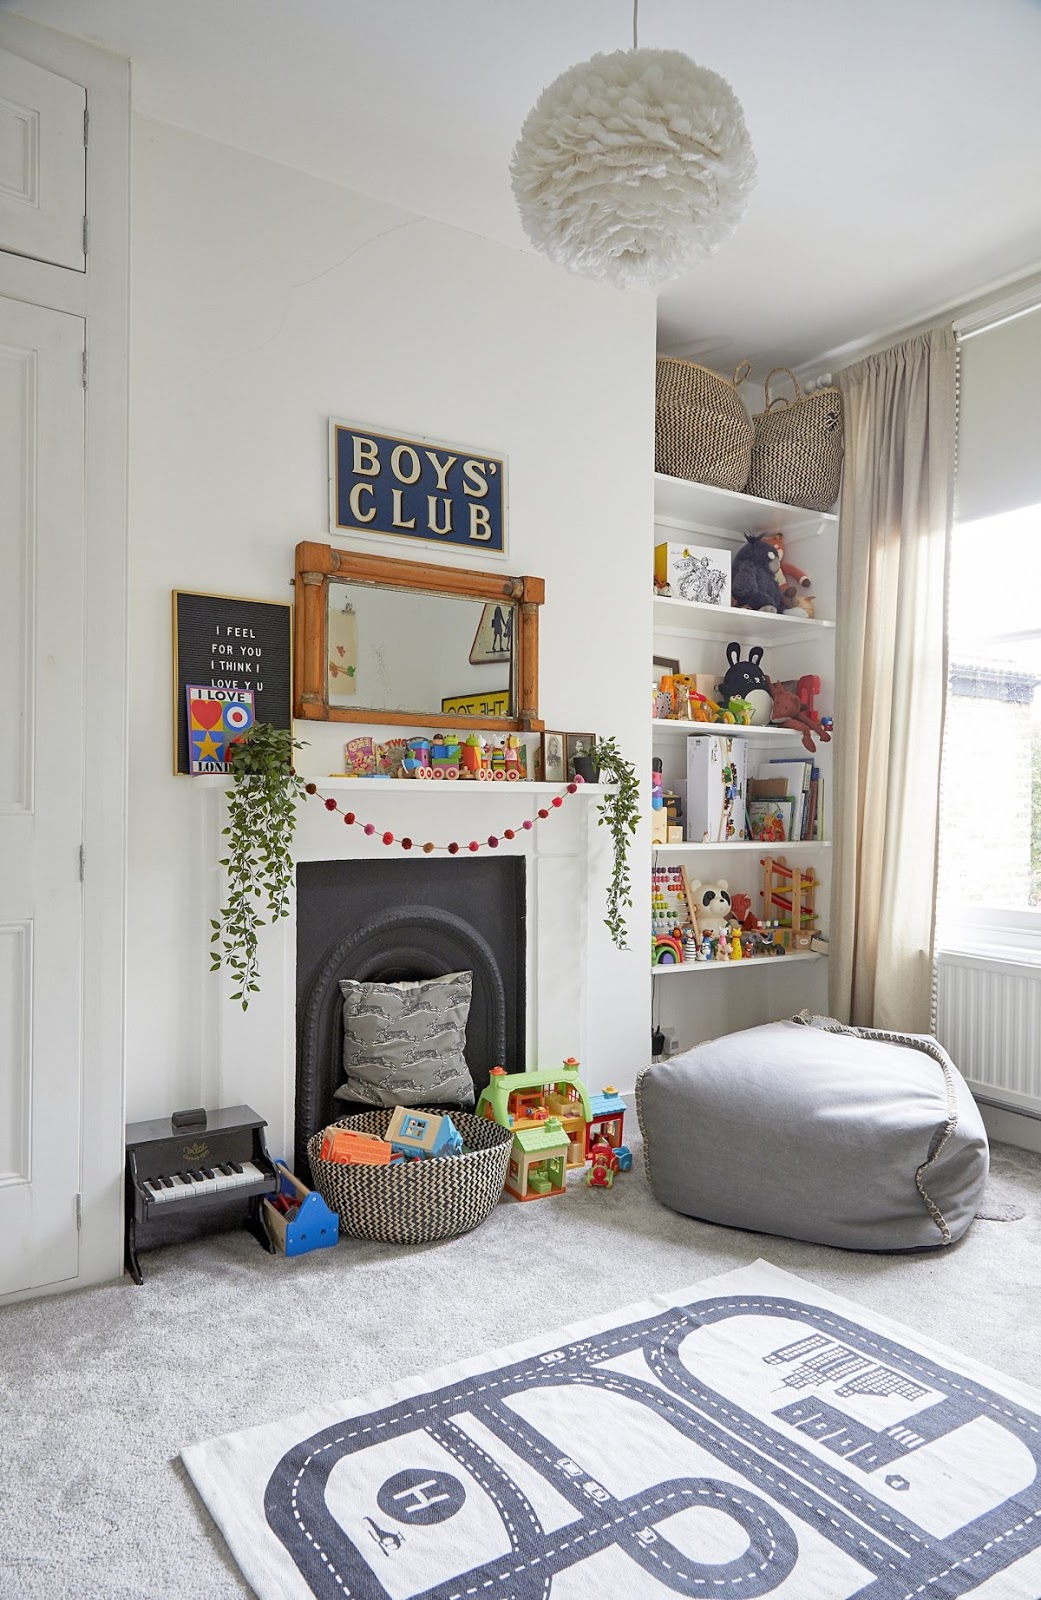 Home Sweet Home: A Cheerful and Happy Space